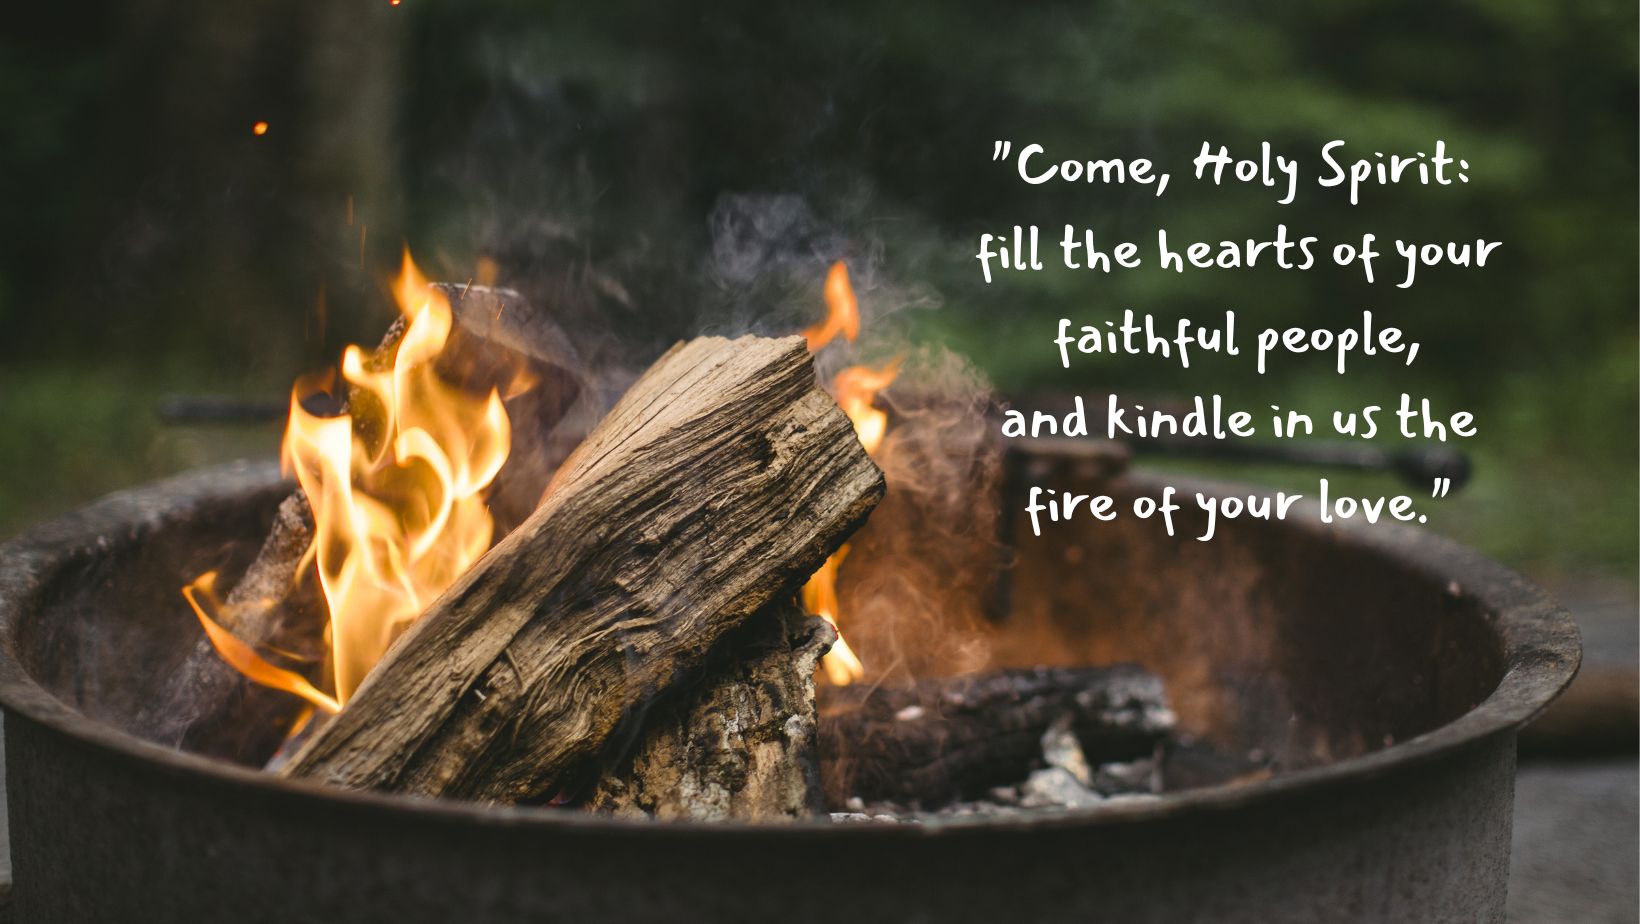 Come-Holy-Spirit-fill-the-hearts-of-your-faithful-people-and-kindle-in-us-the-fire-of-your-love.